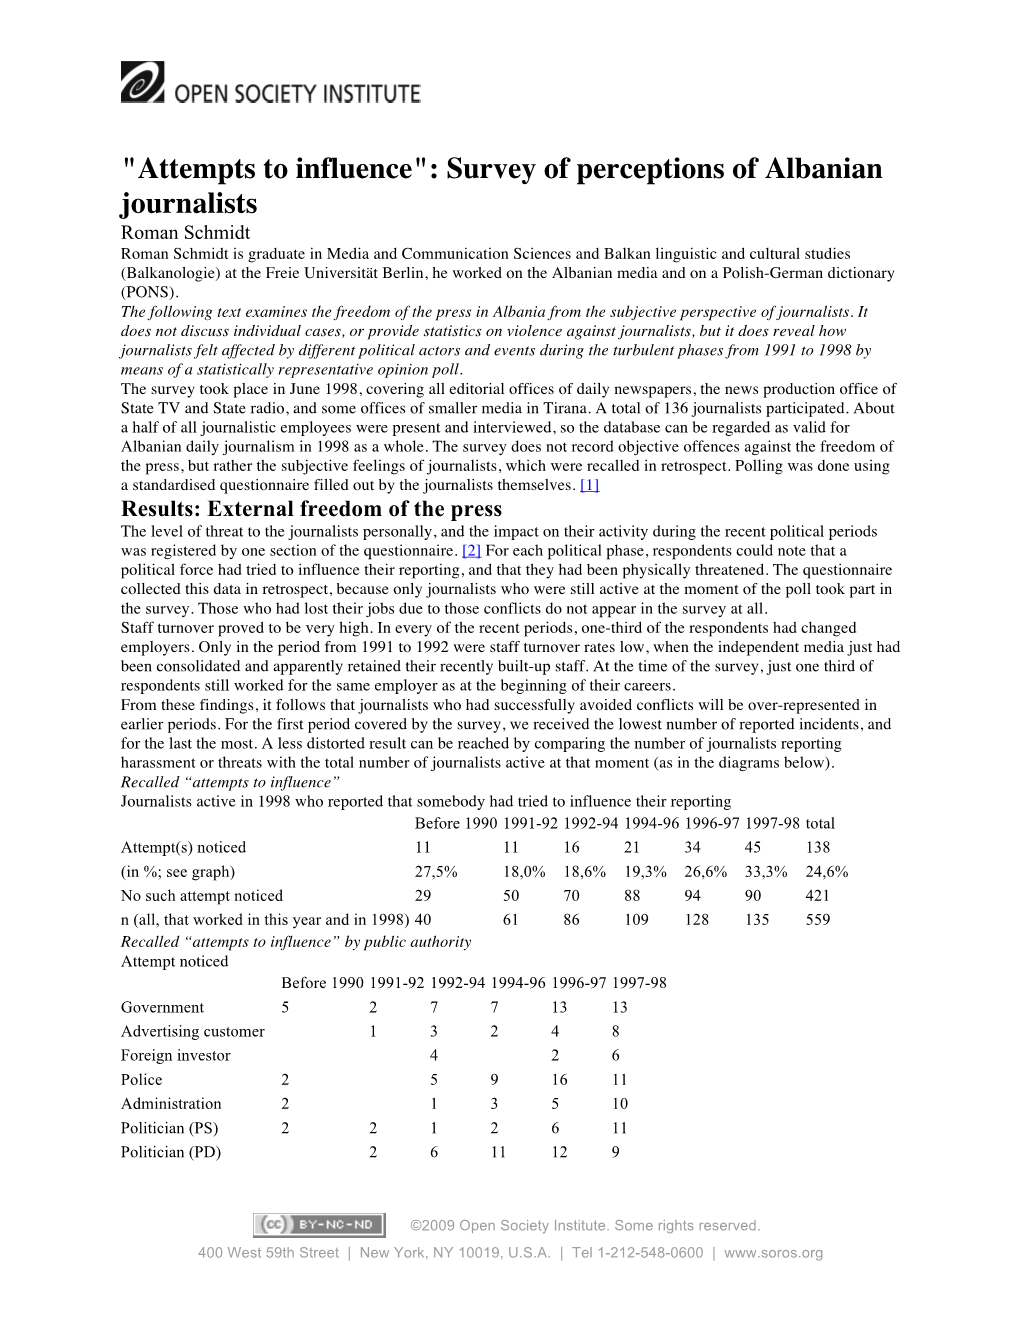 "Attempts to Influence": Survey of Perceptions of Albanian Journalists